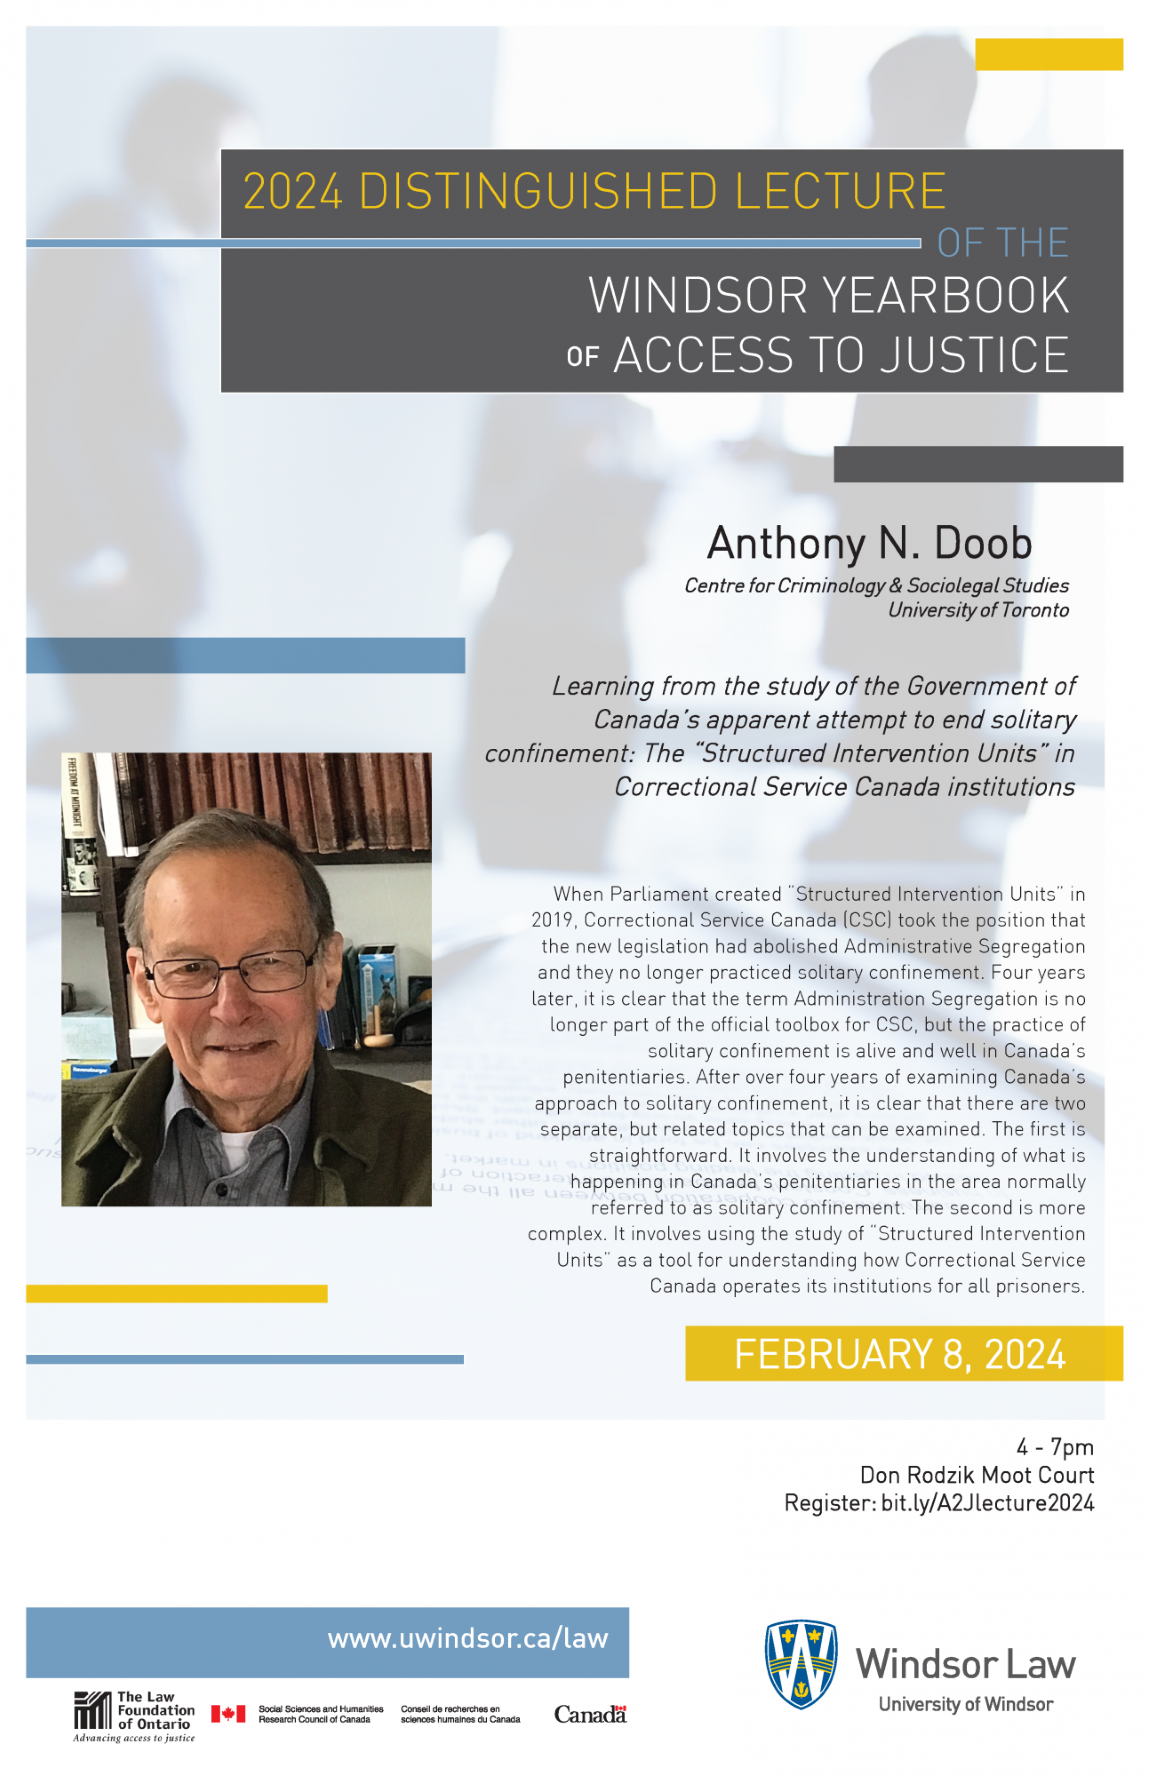 Poster for Tony Doob lecture February 8, 2024 at Windsor Law